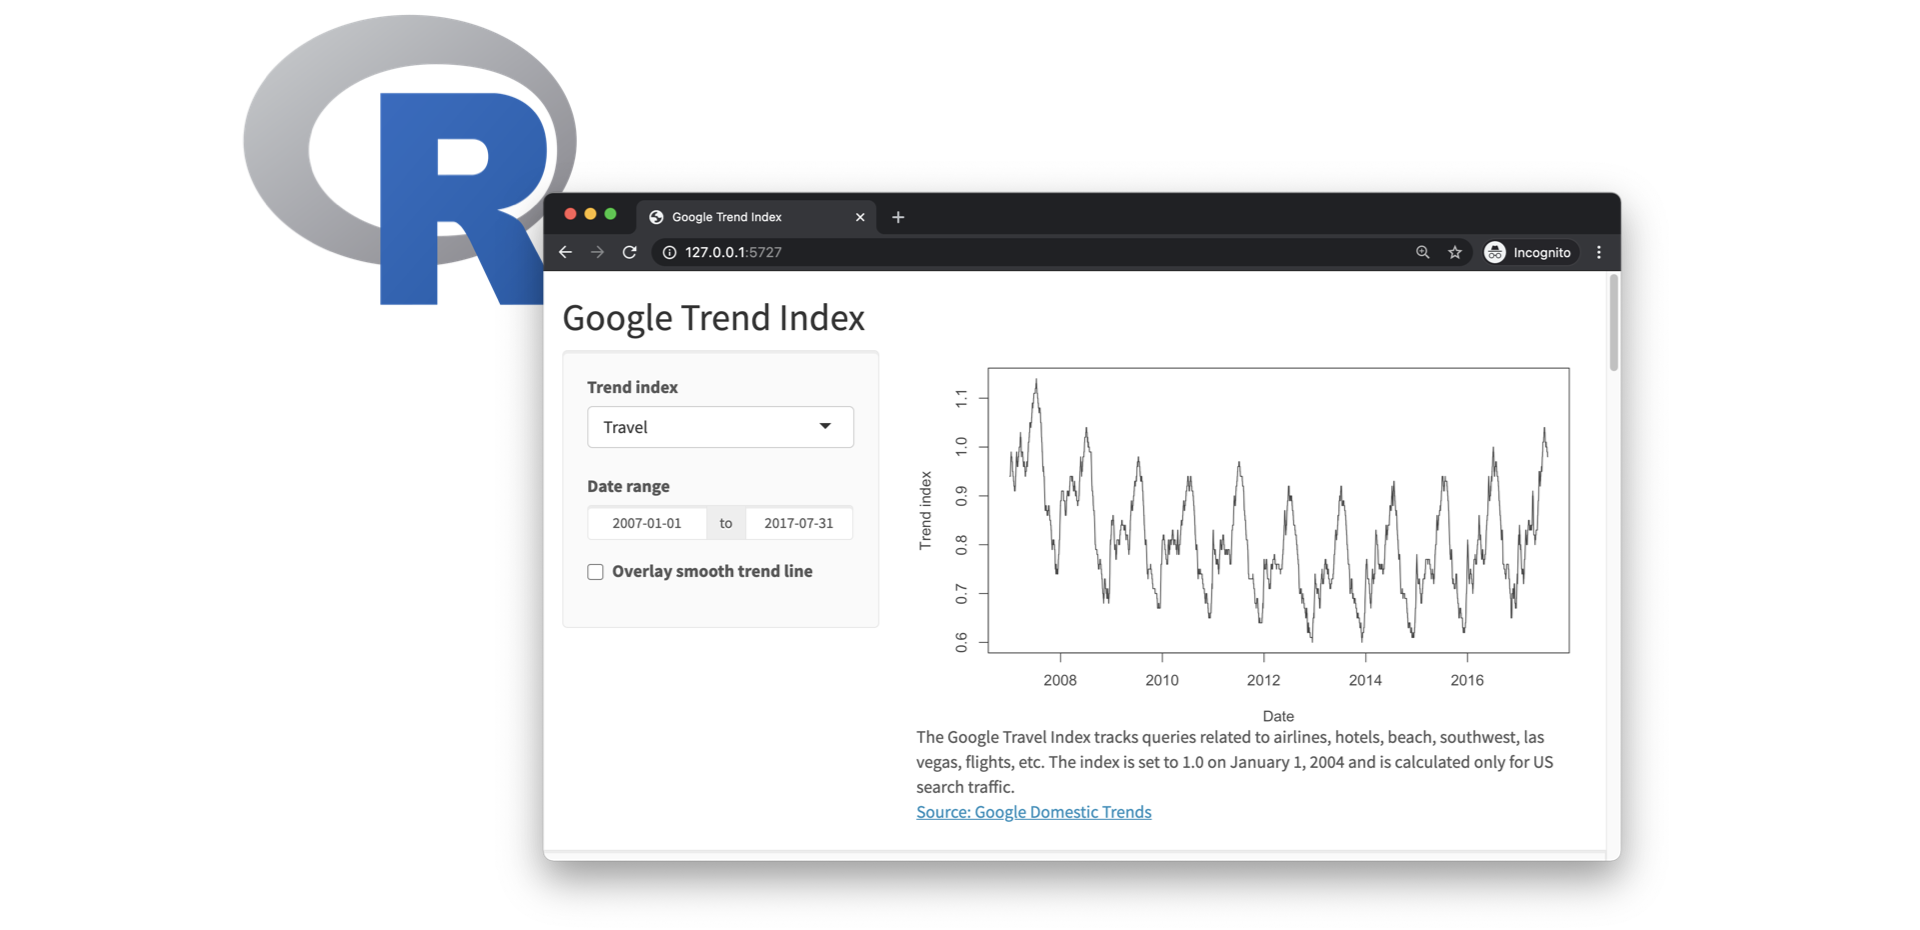 Image of 'R' in the background with a view of a Shiny app of a 'Google Trend Index'. The app has Trend Indexes and Date Range on the left and a line plot of Date by Trend on the right. The plot has lines that peak and trough with similar patters for each year.